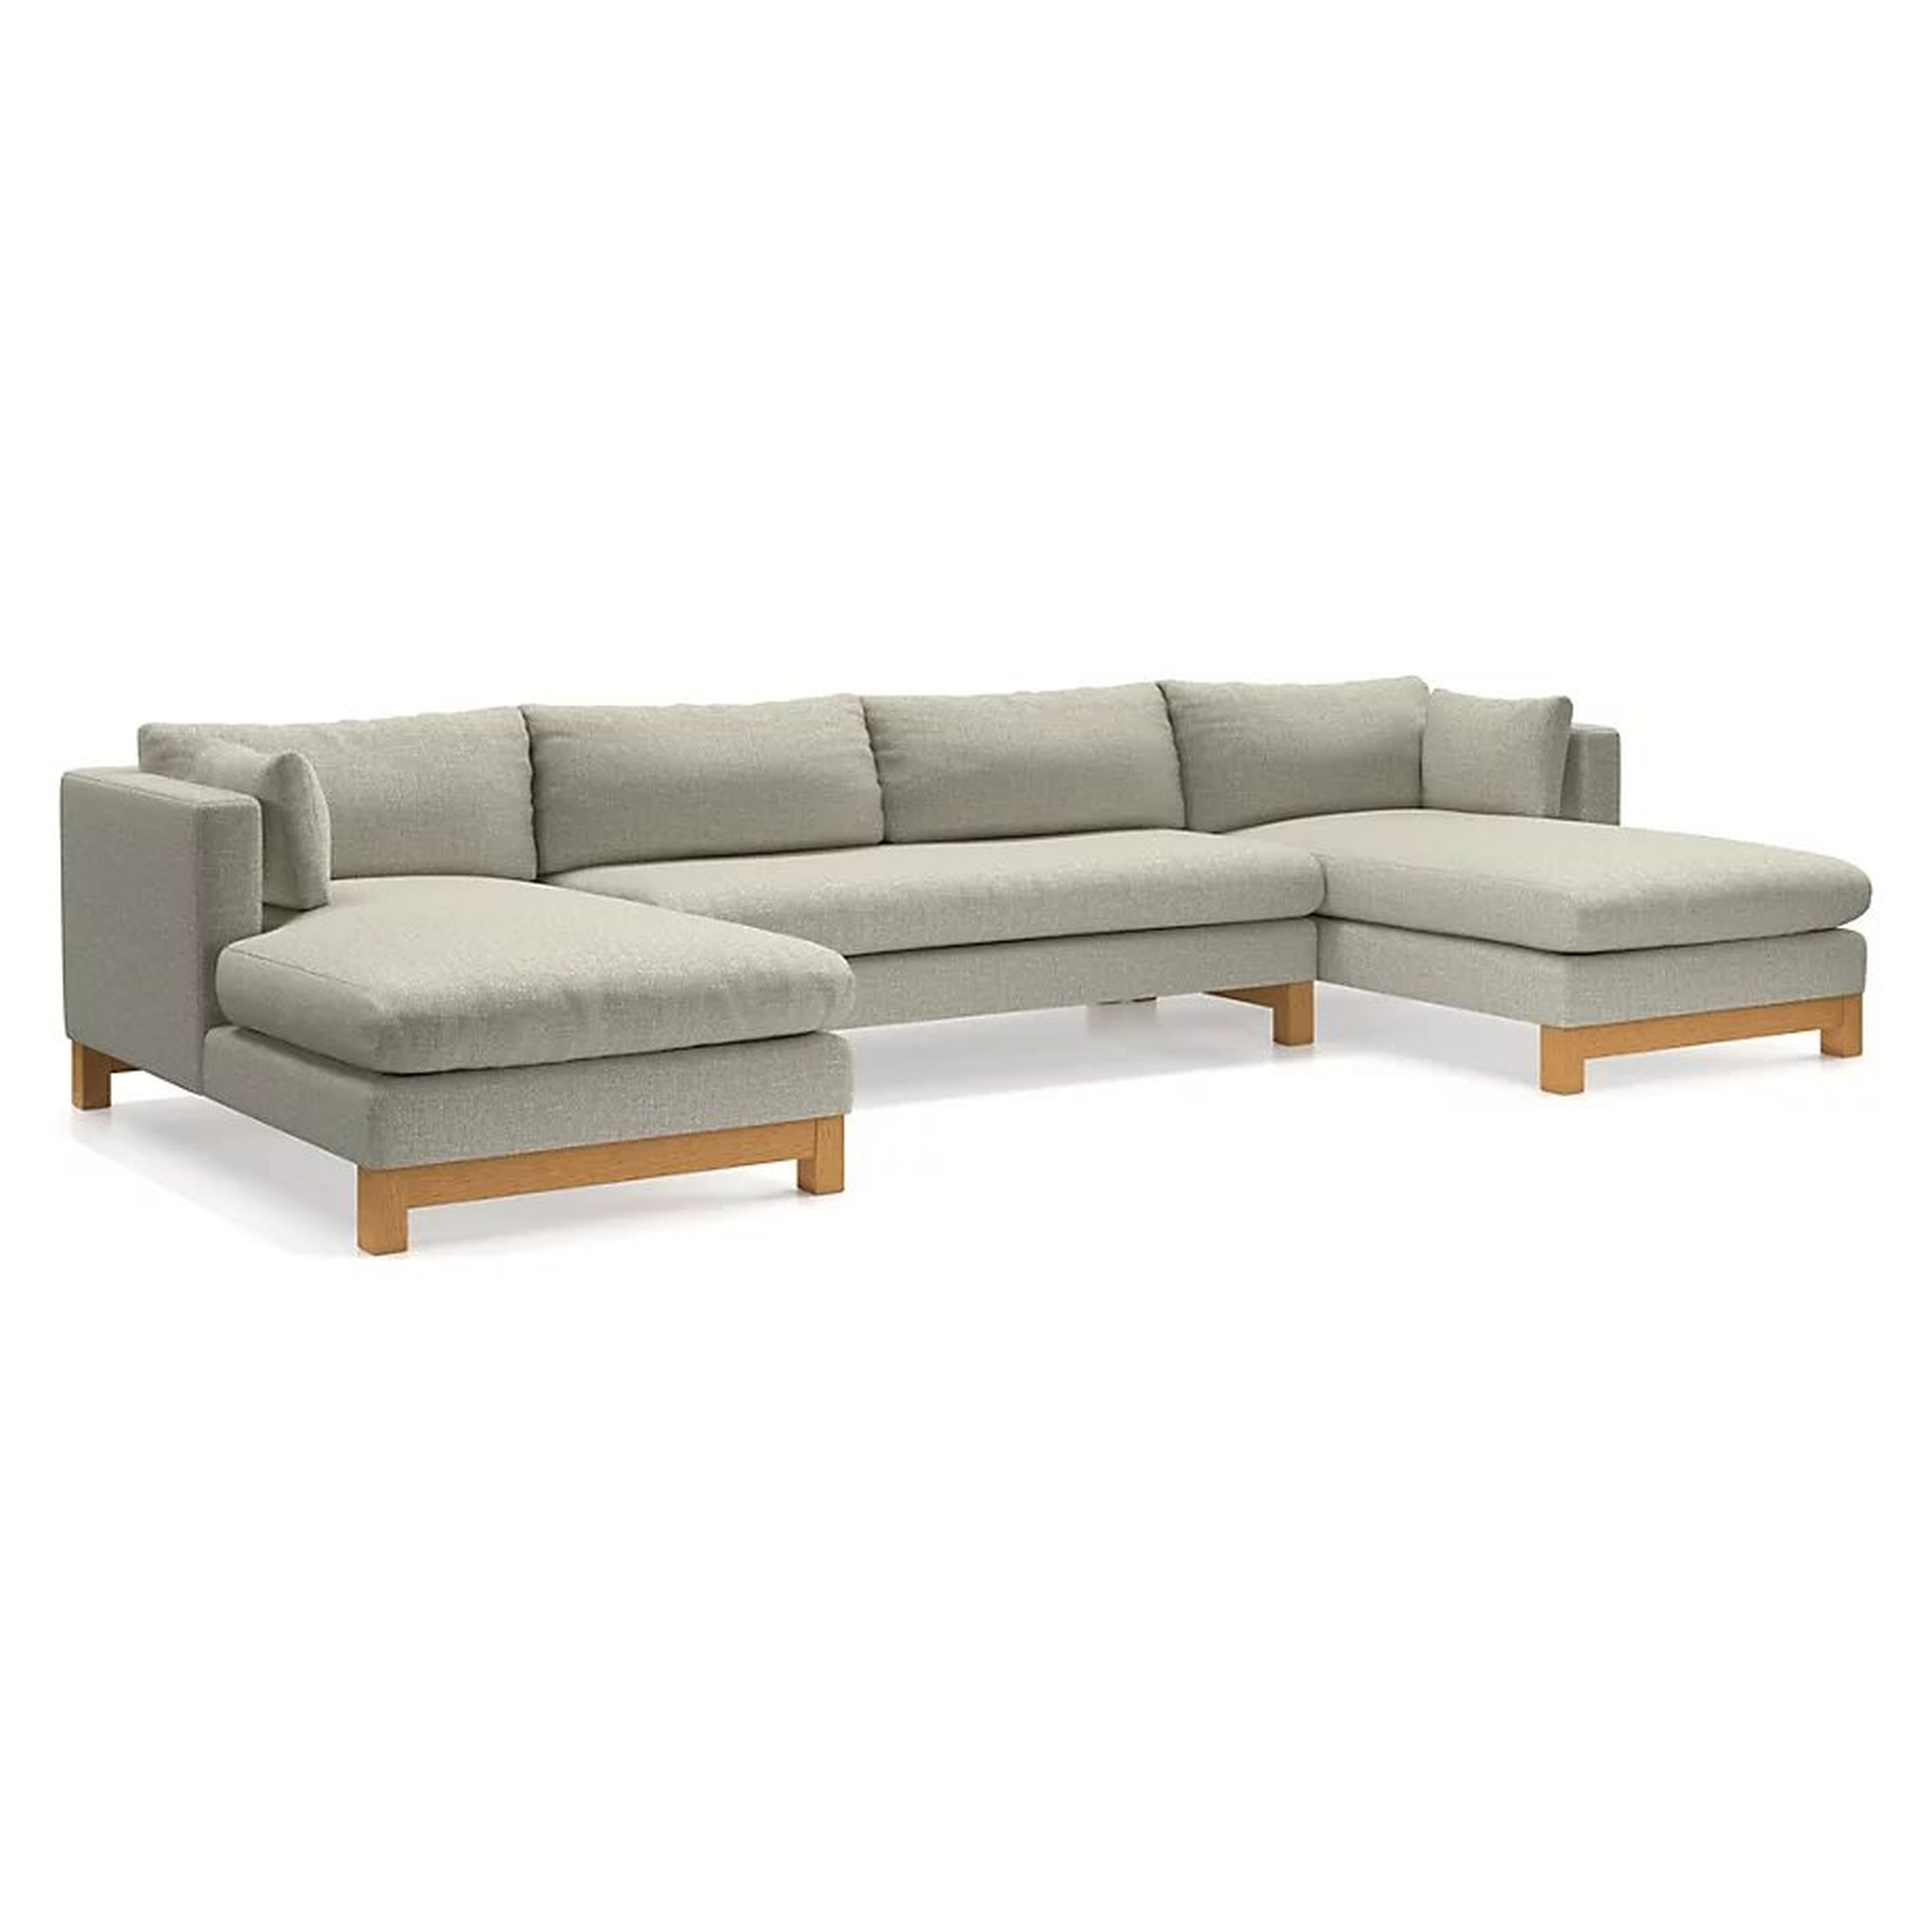 Pacific Bench 3-Piece U-Shaped Sectional Sofa with Wood Legs - Crate and Barrel